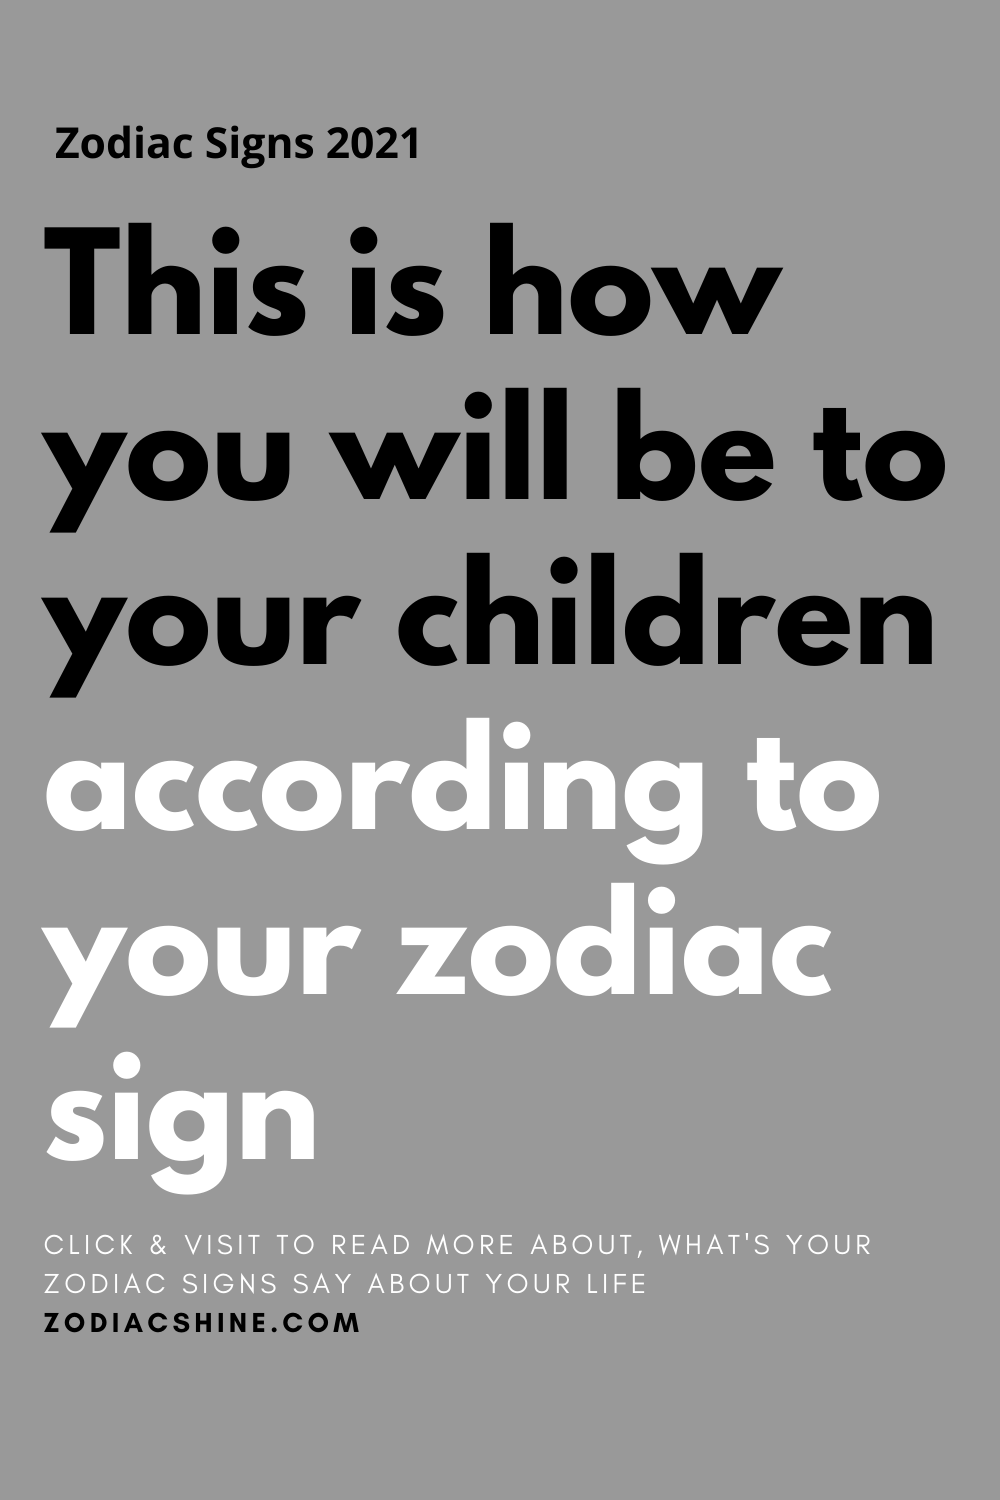 This is how you will be to your children according to your zodiac sign